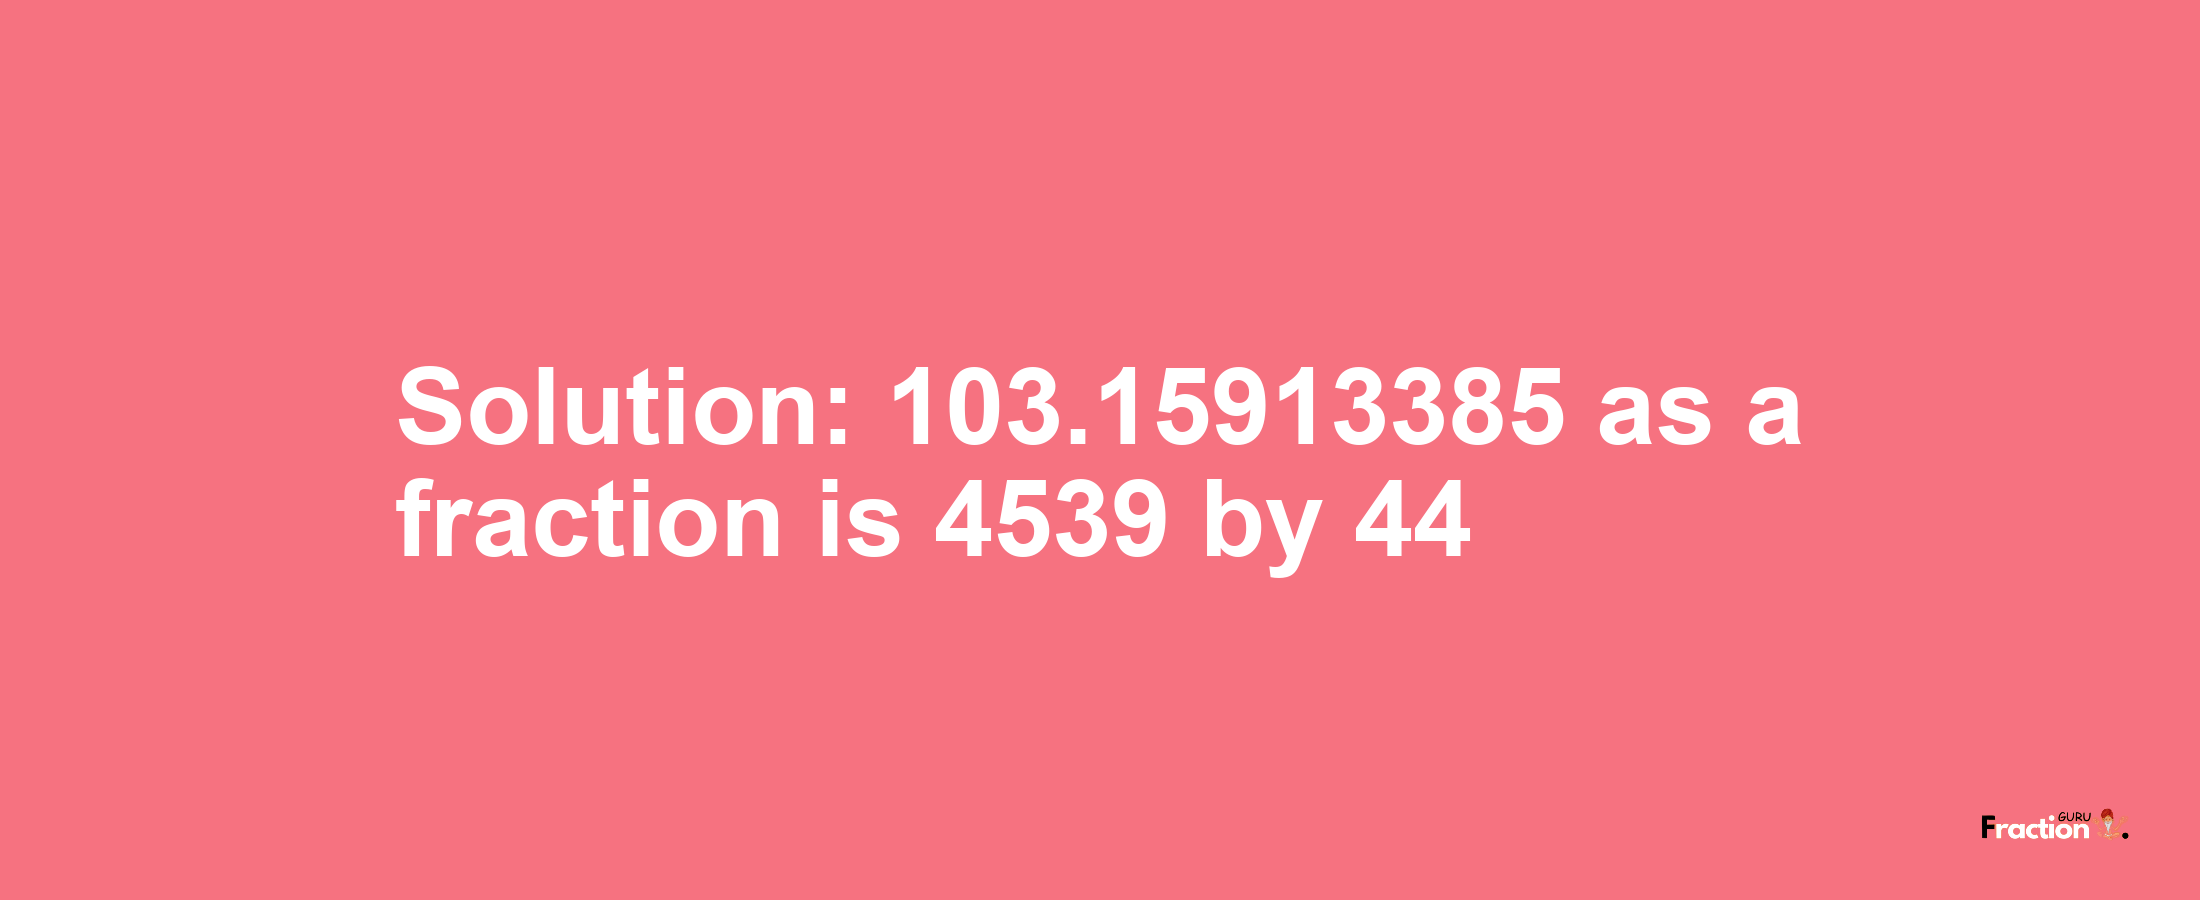 Solution:103.15913385 as a fraction is 4539/44